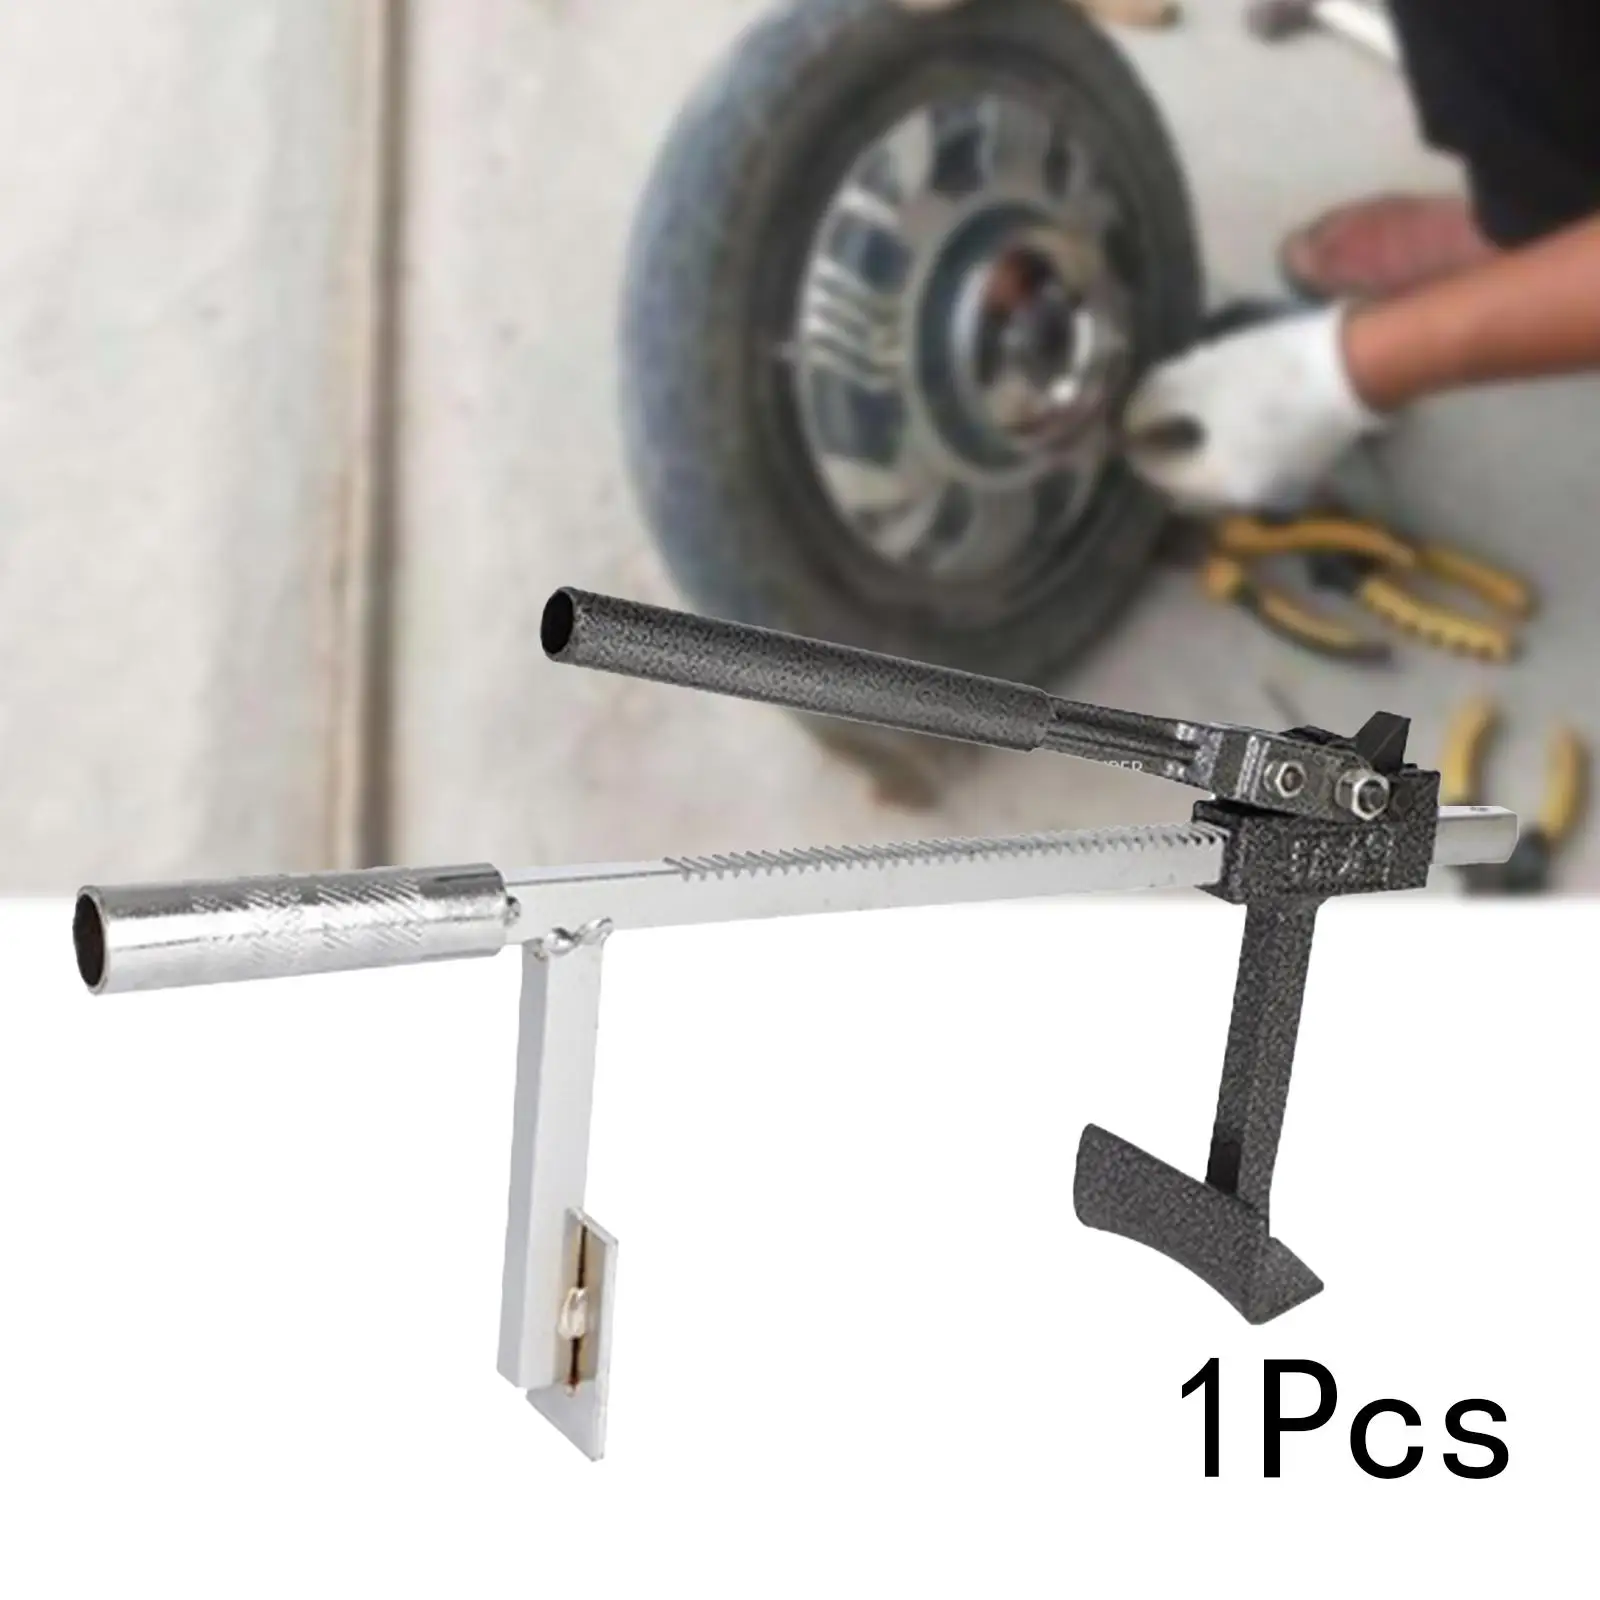 Efficient Tire Changing Tool for Cars and Motorcycles - Quick and Easy to Use